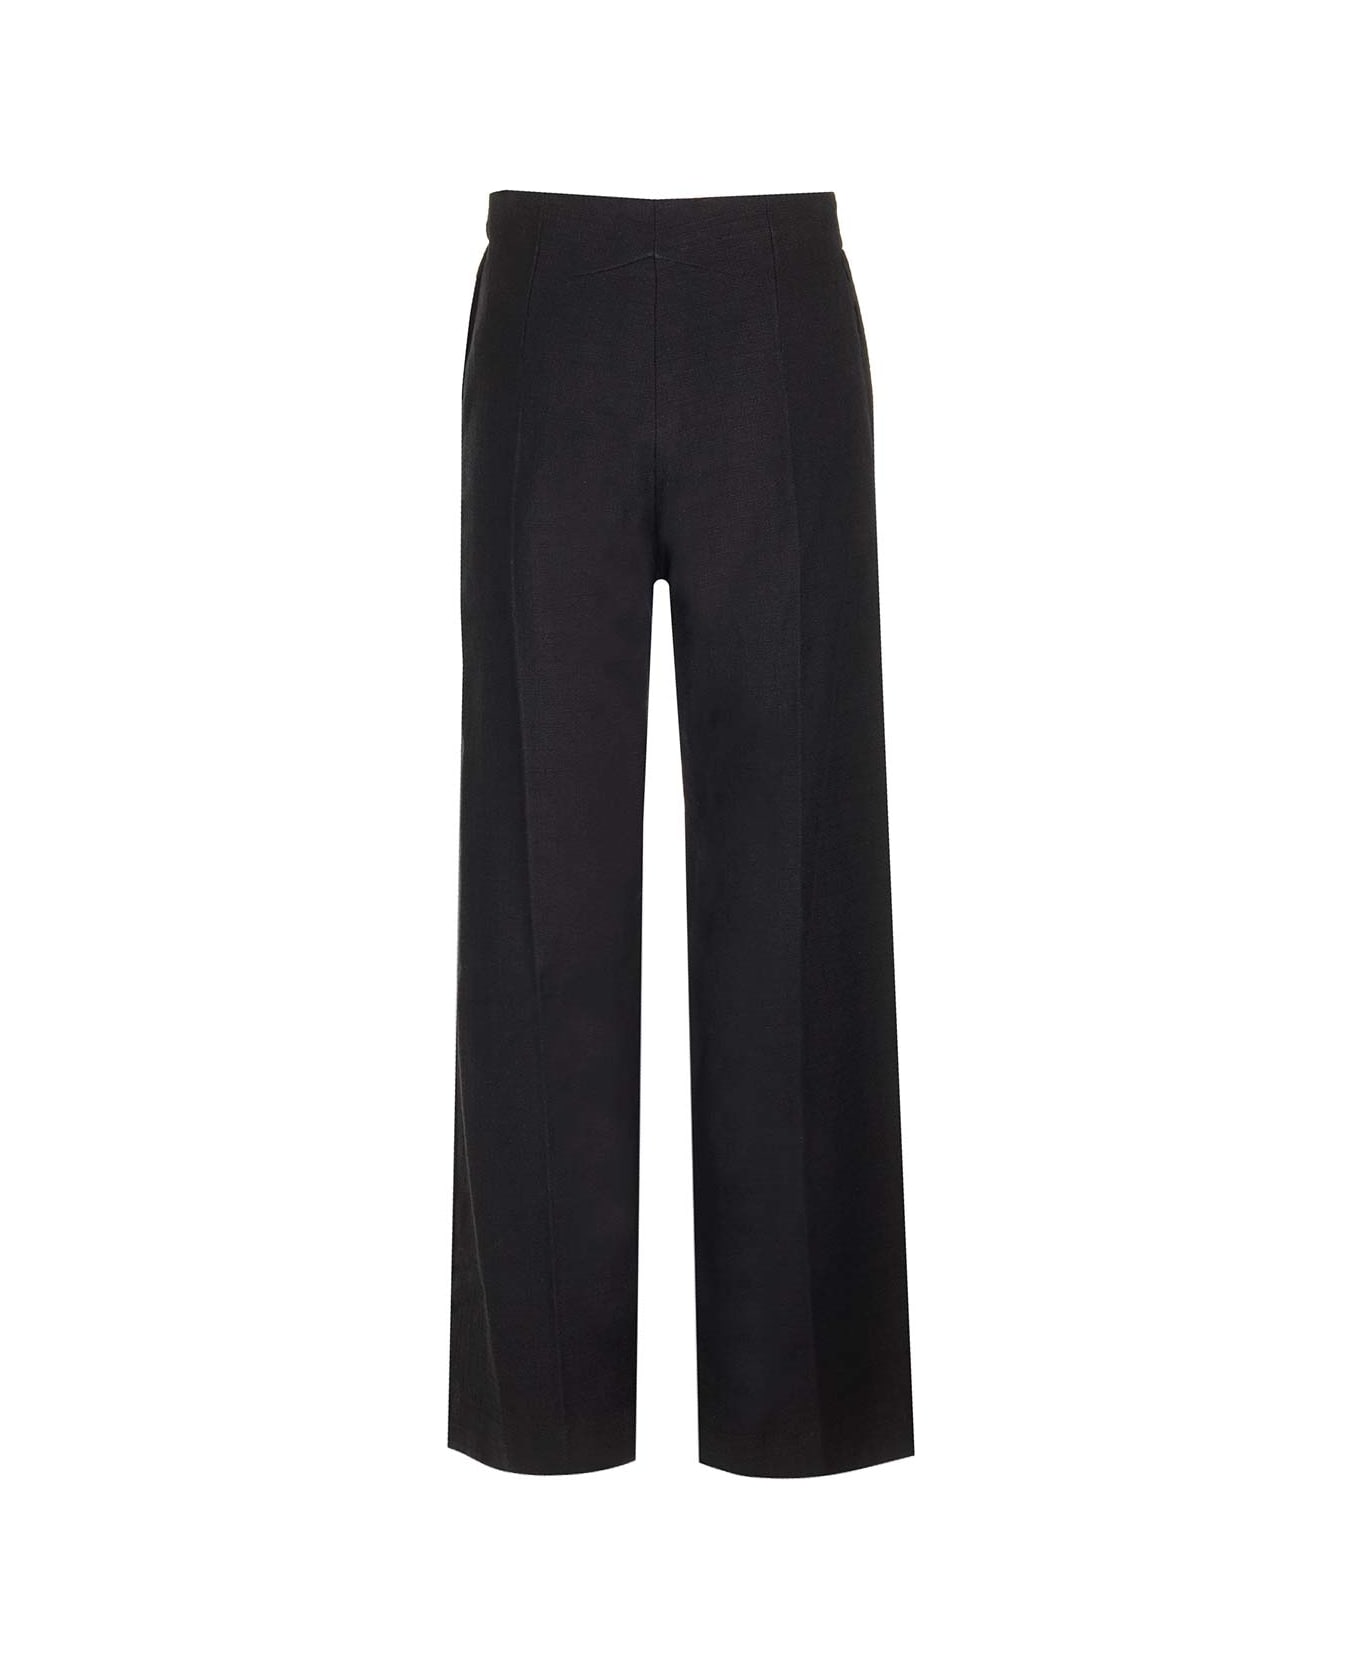 Patou Stretch Tweed Trousers - BLACK ボトムス